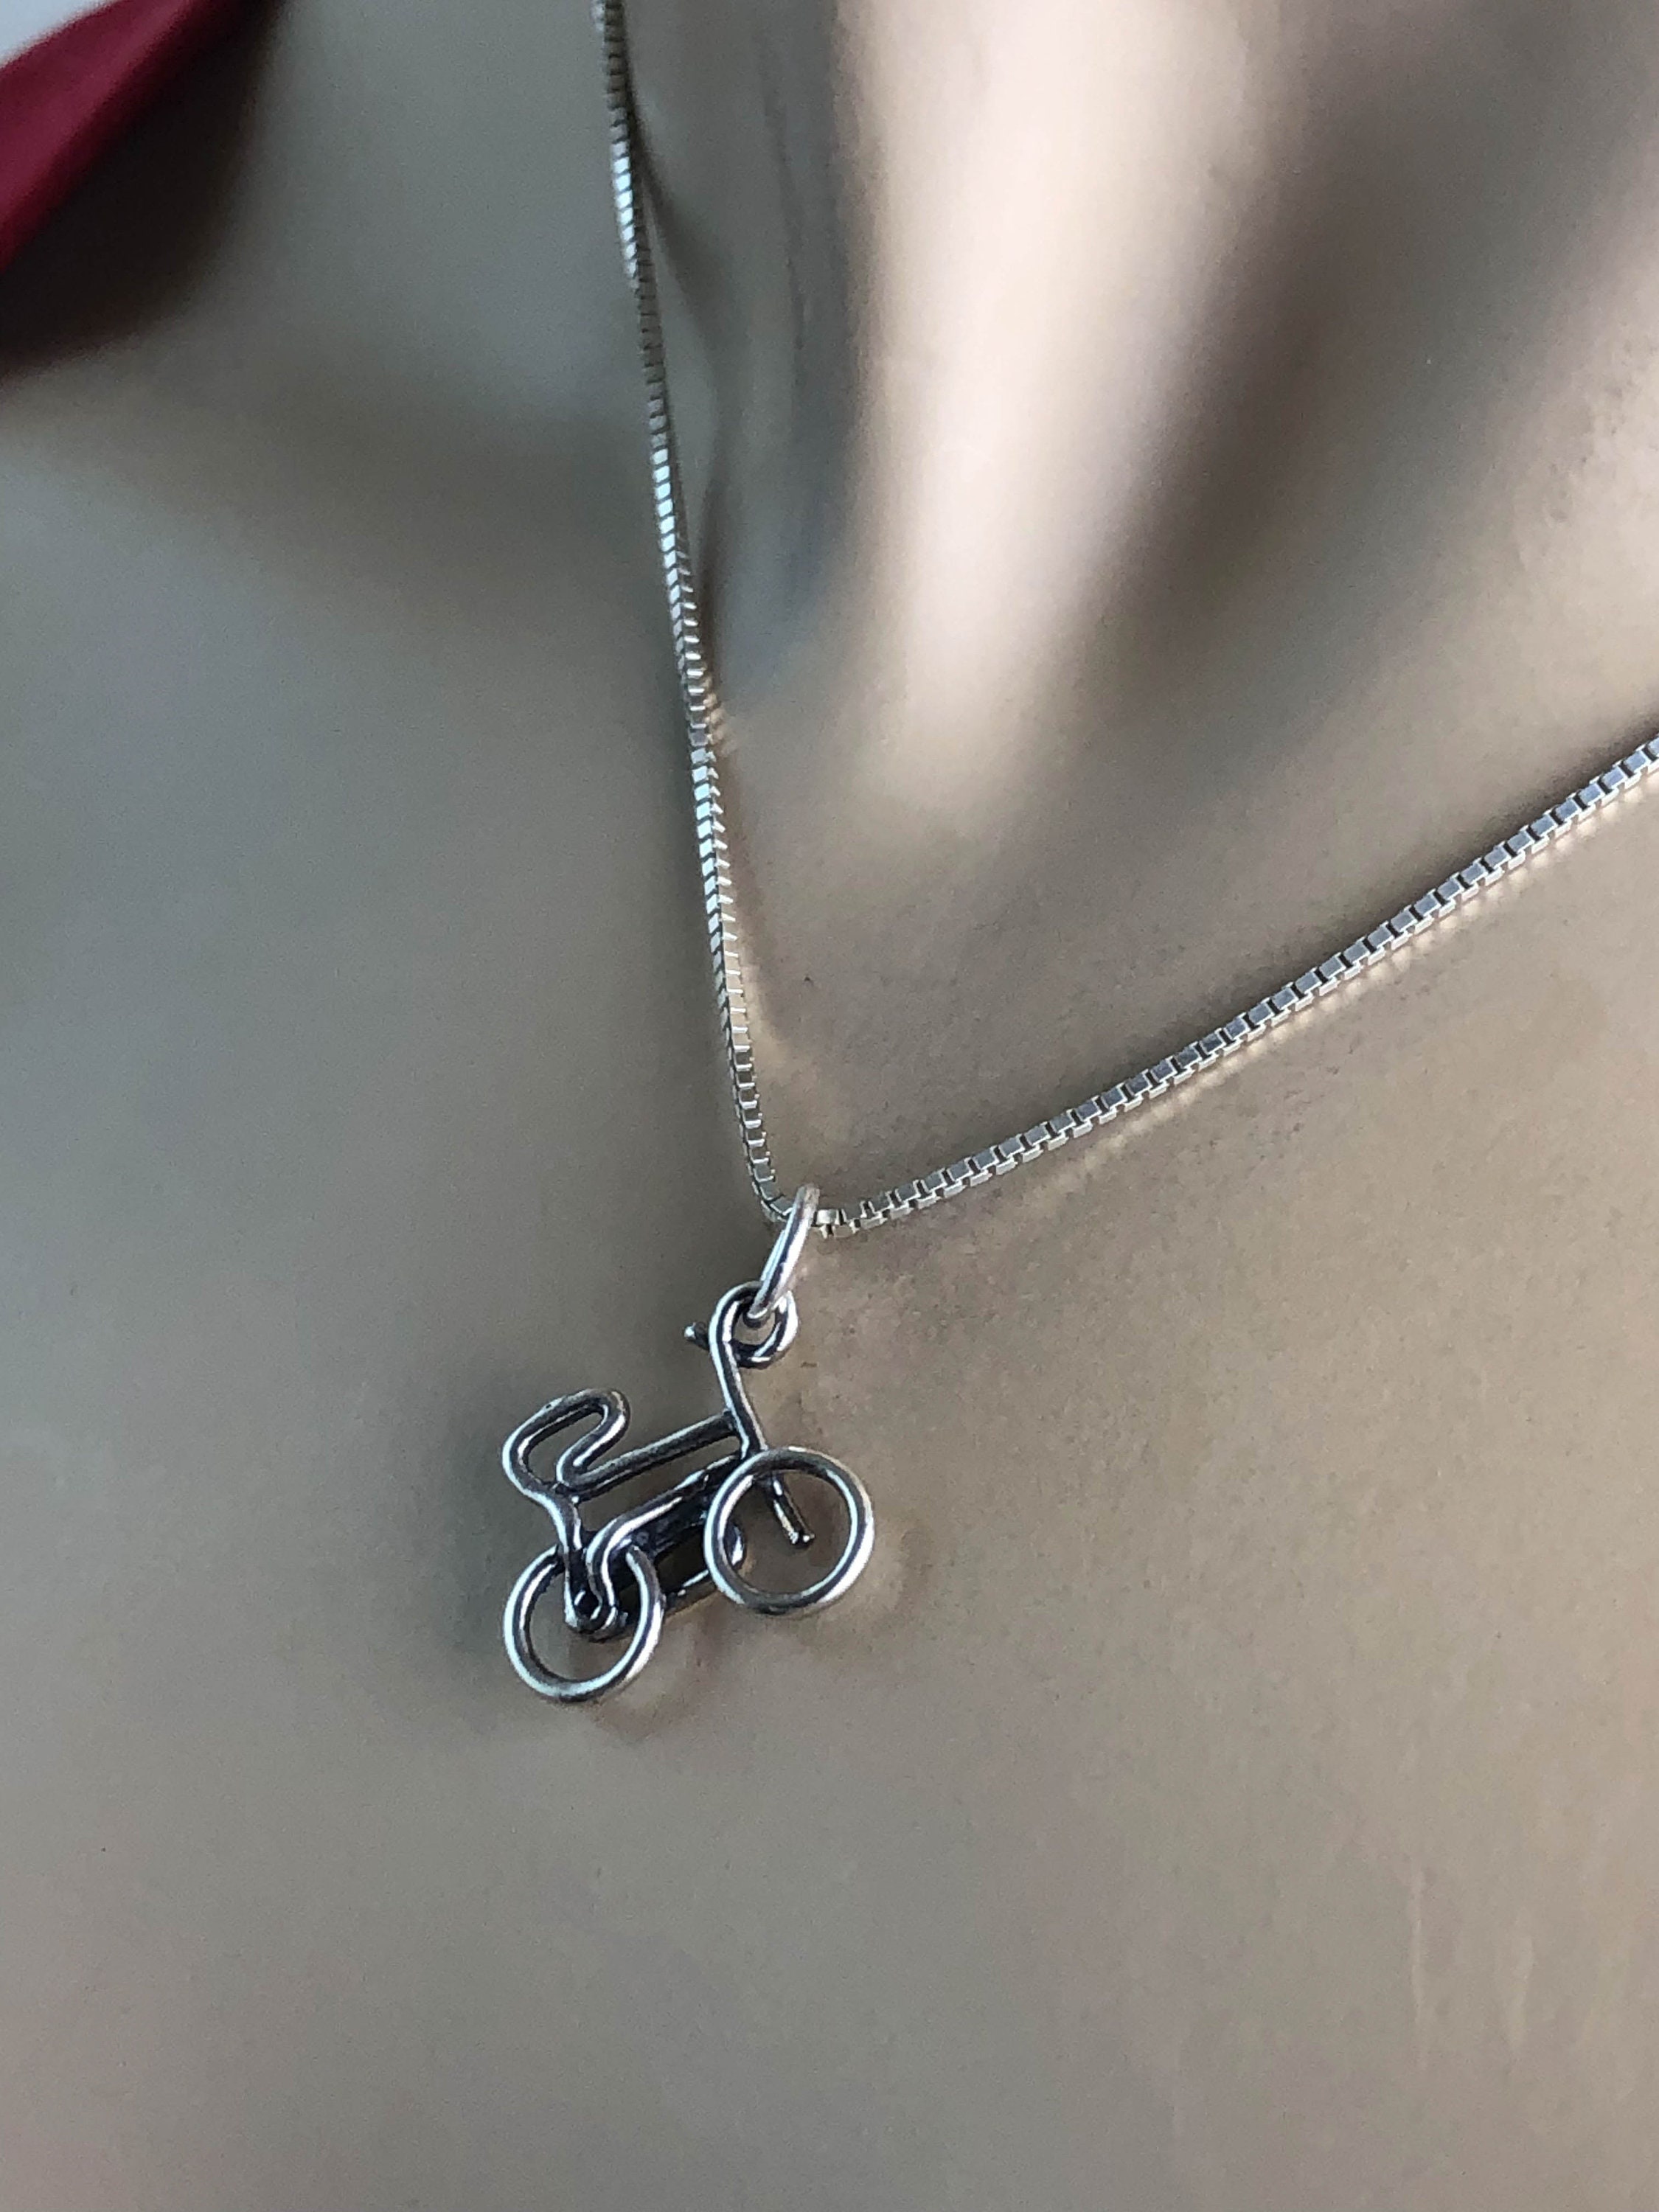 Bicycle Necklace Sterling Silver Bicycle Pendant Bicycle | Etsy